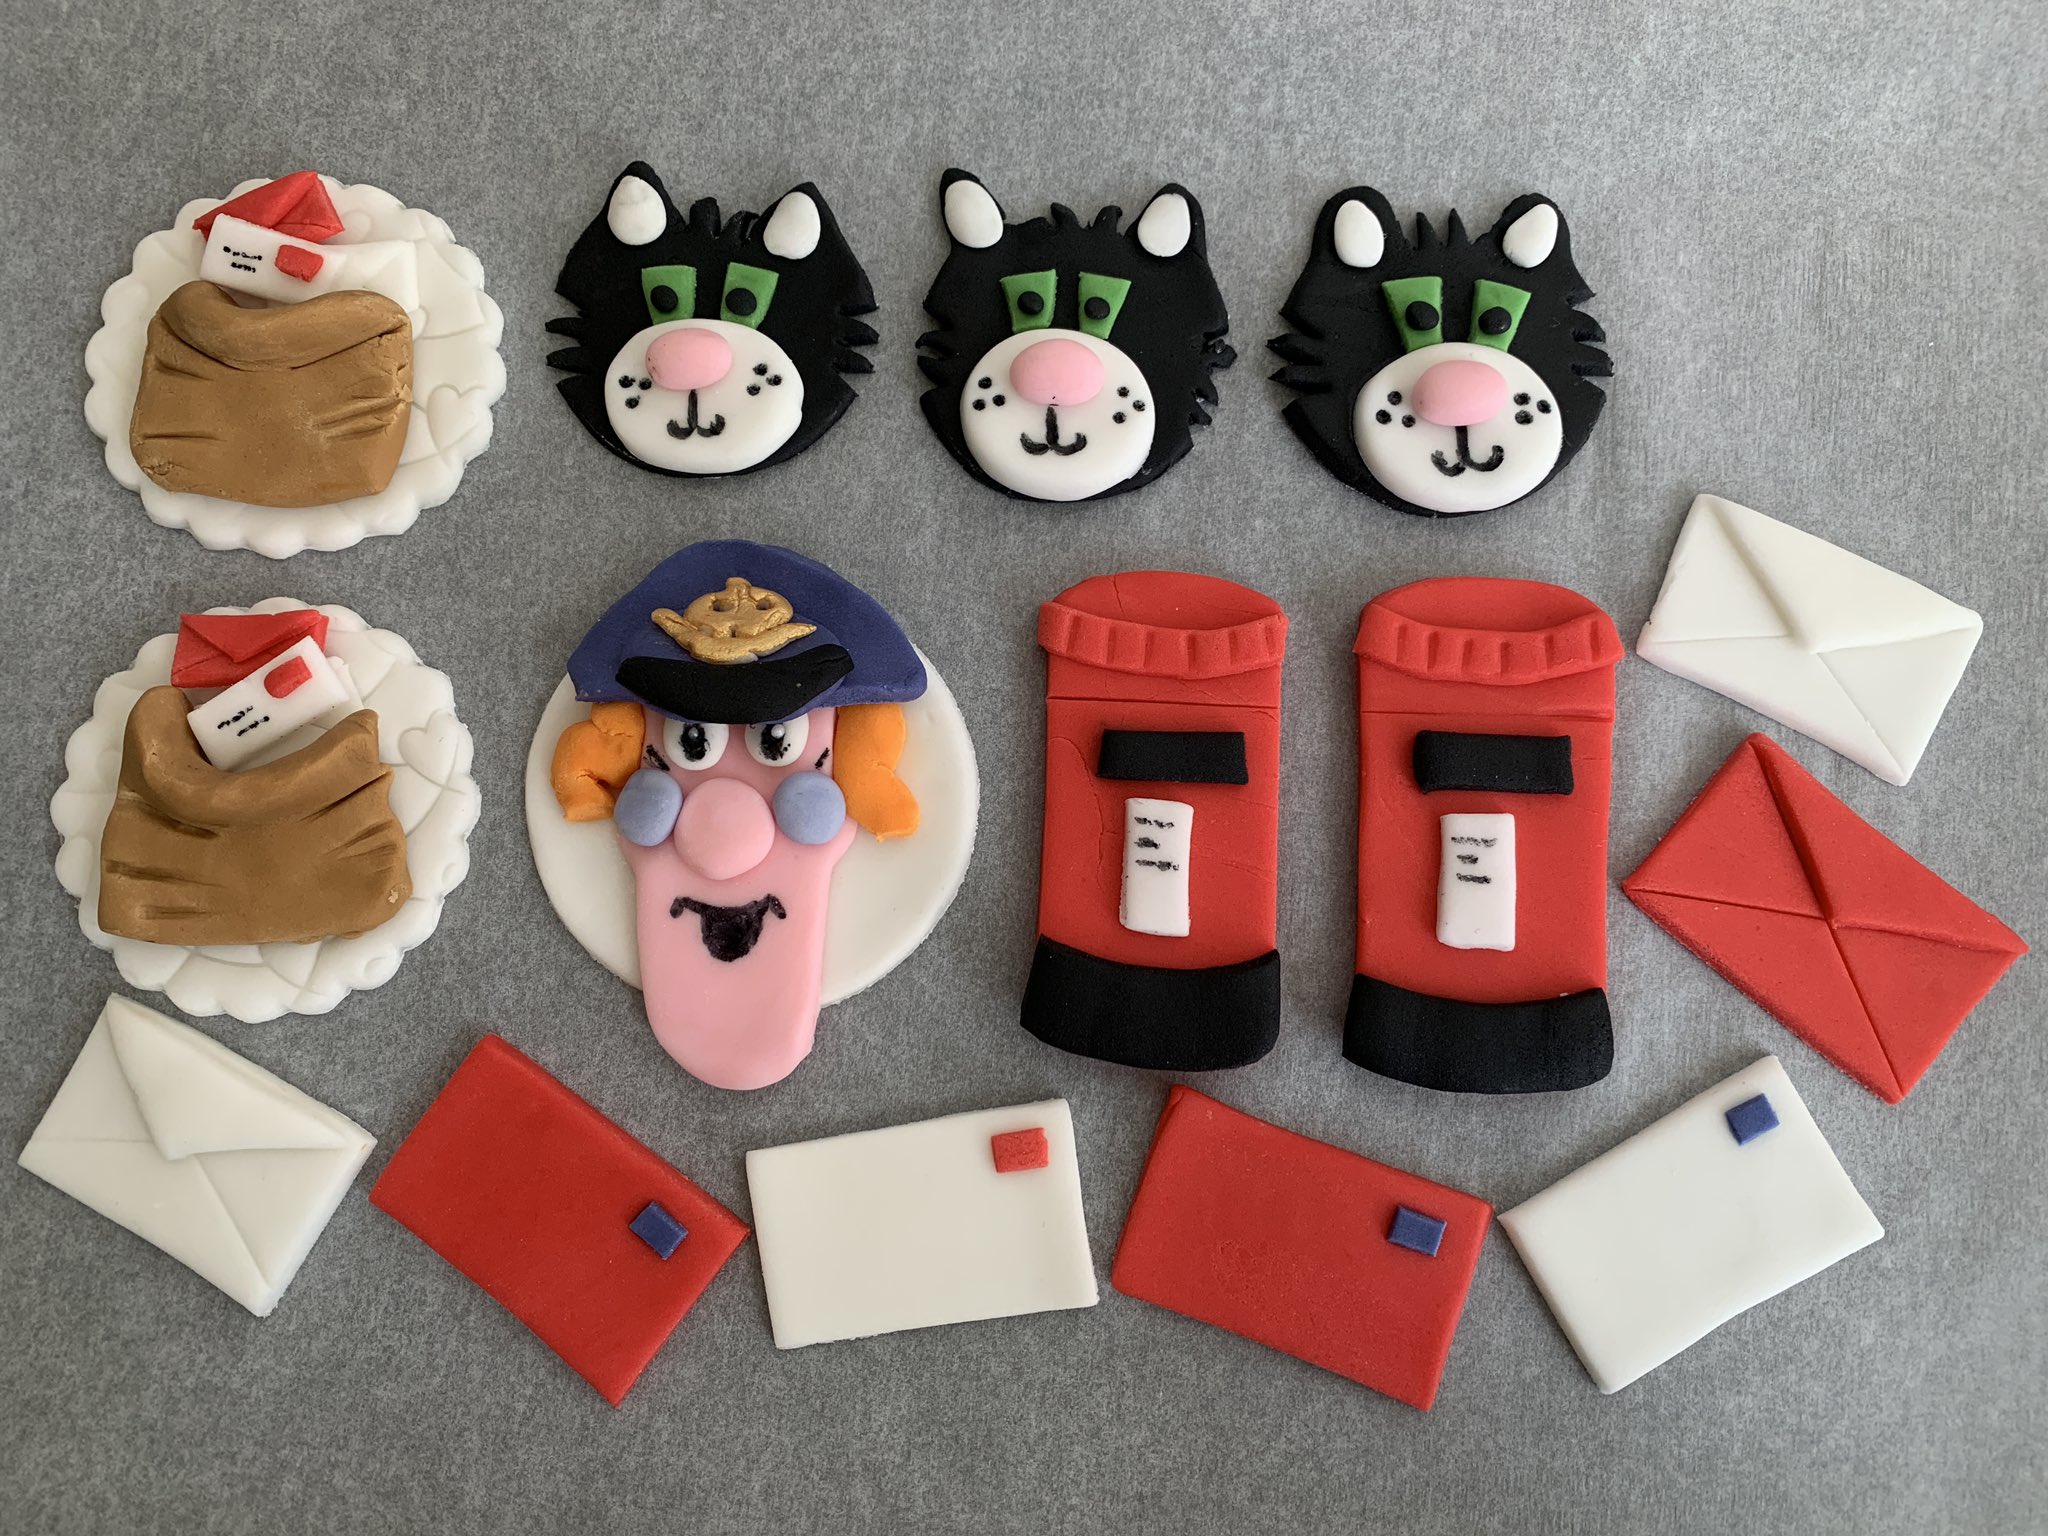 Postman Pat Toppers for 90s cupcakes